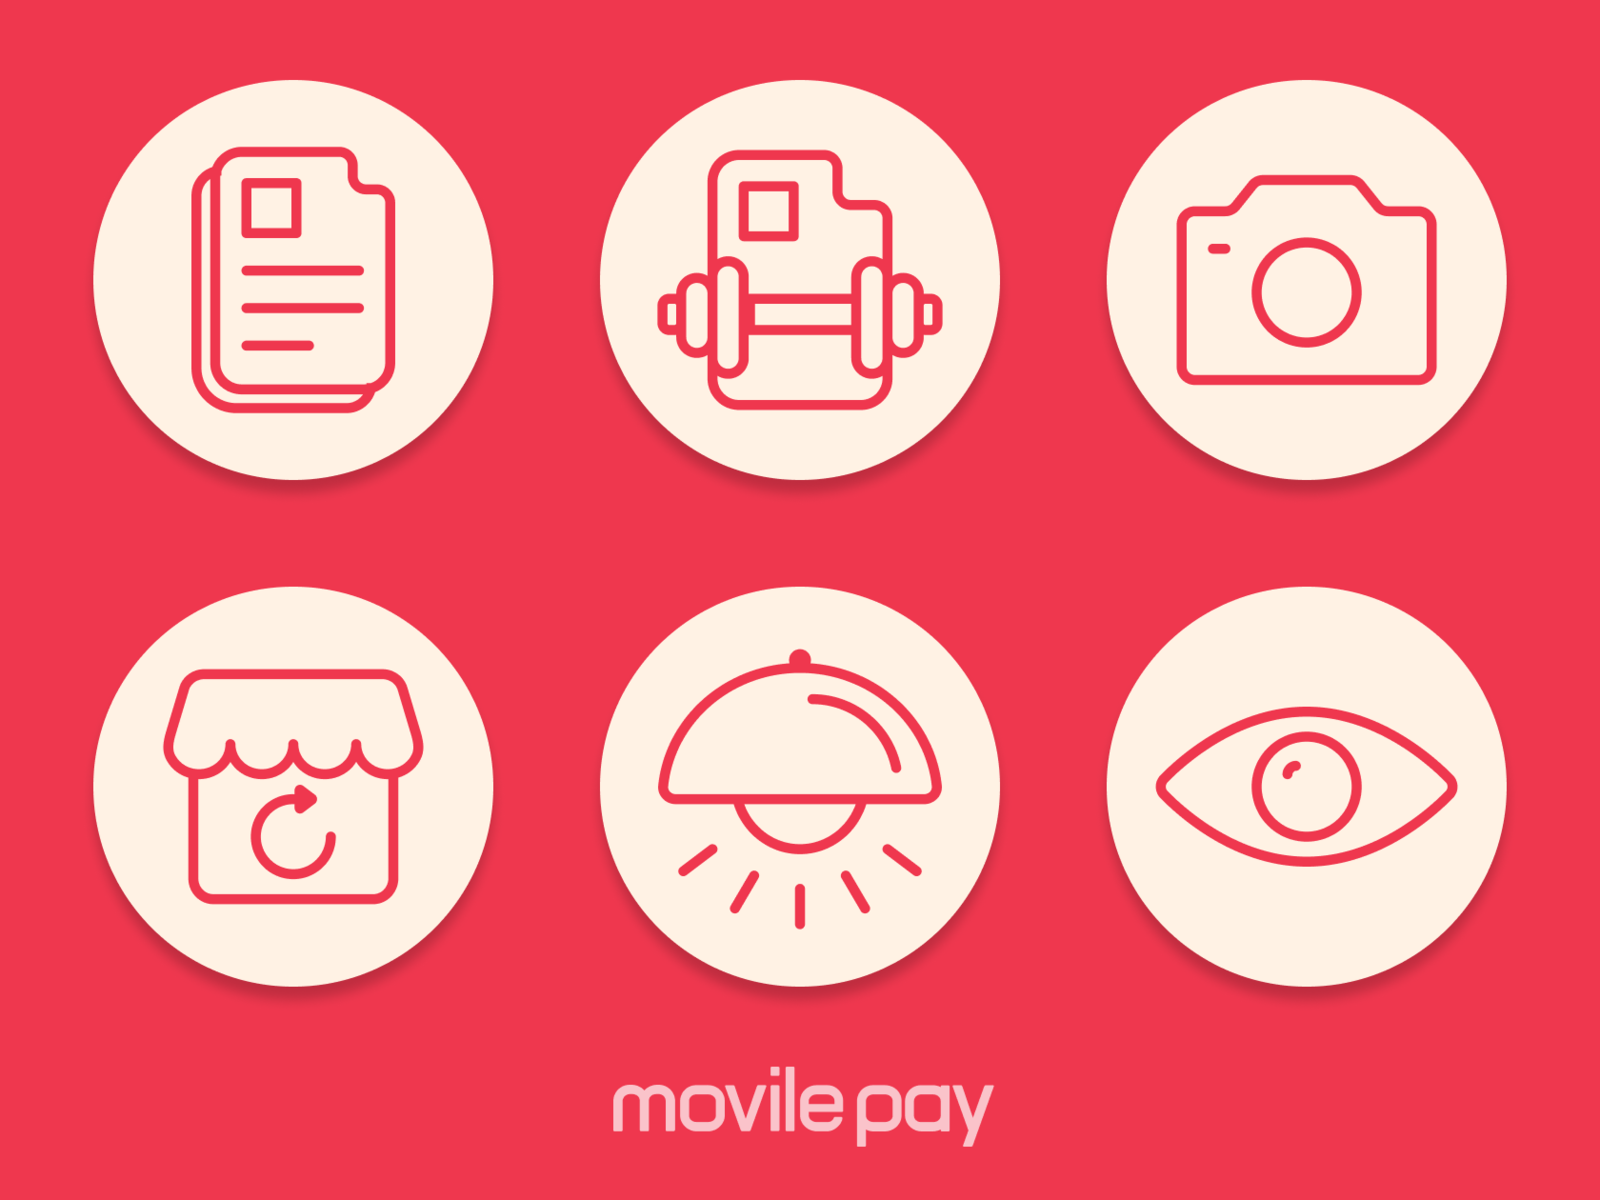 Icons for MovilePay Wallet by Guilherme Pires on Dribbble